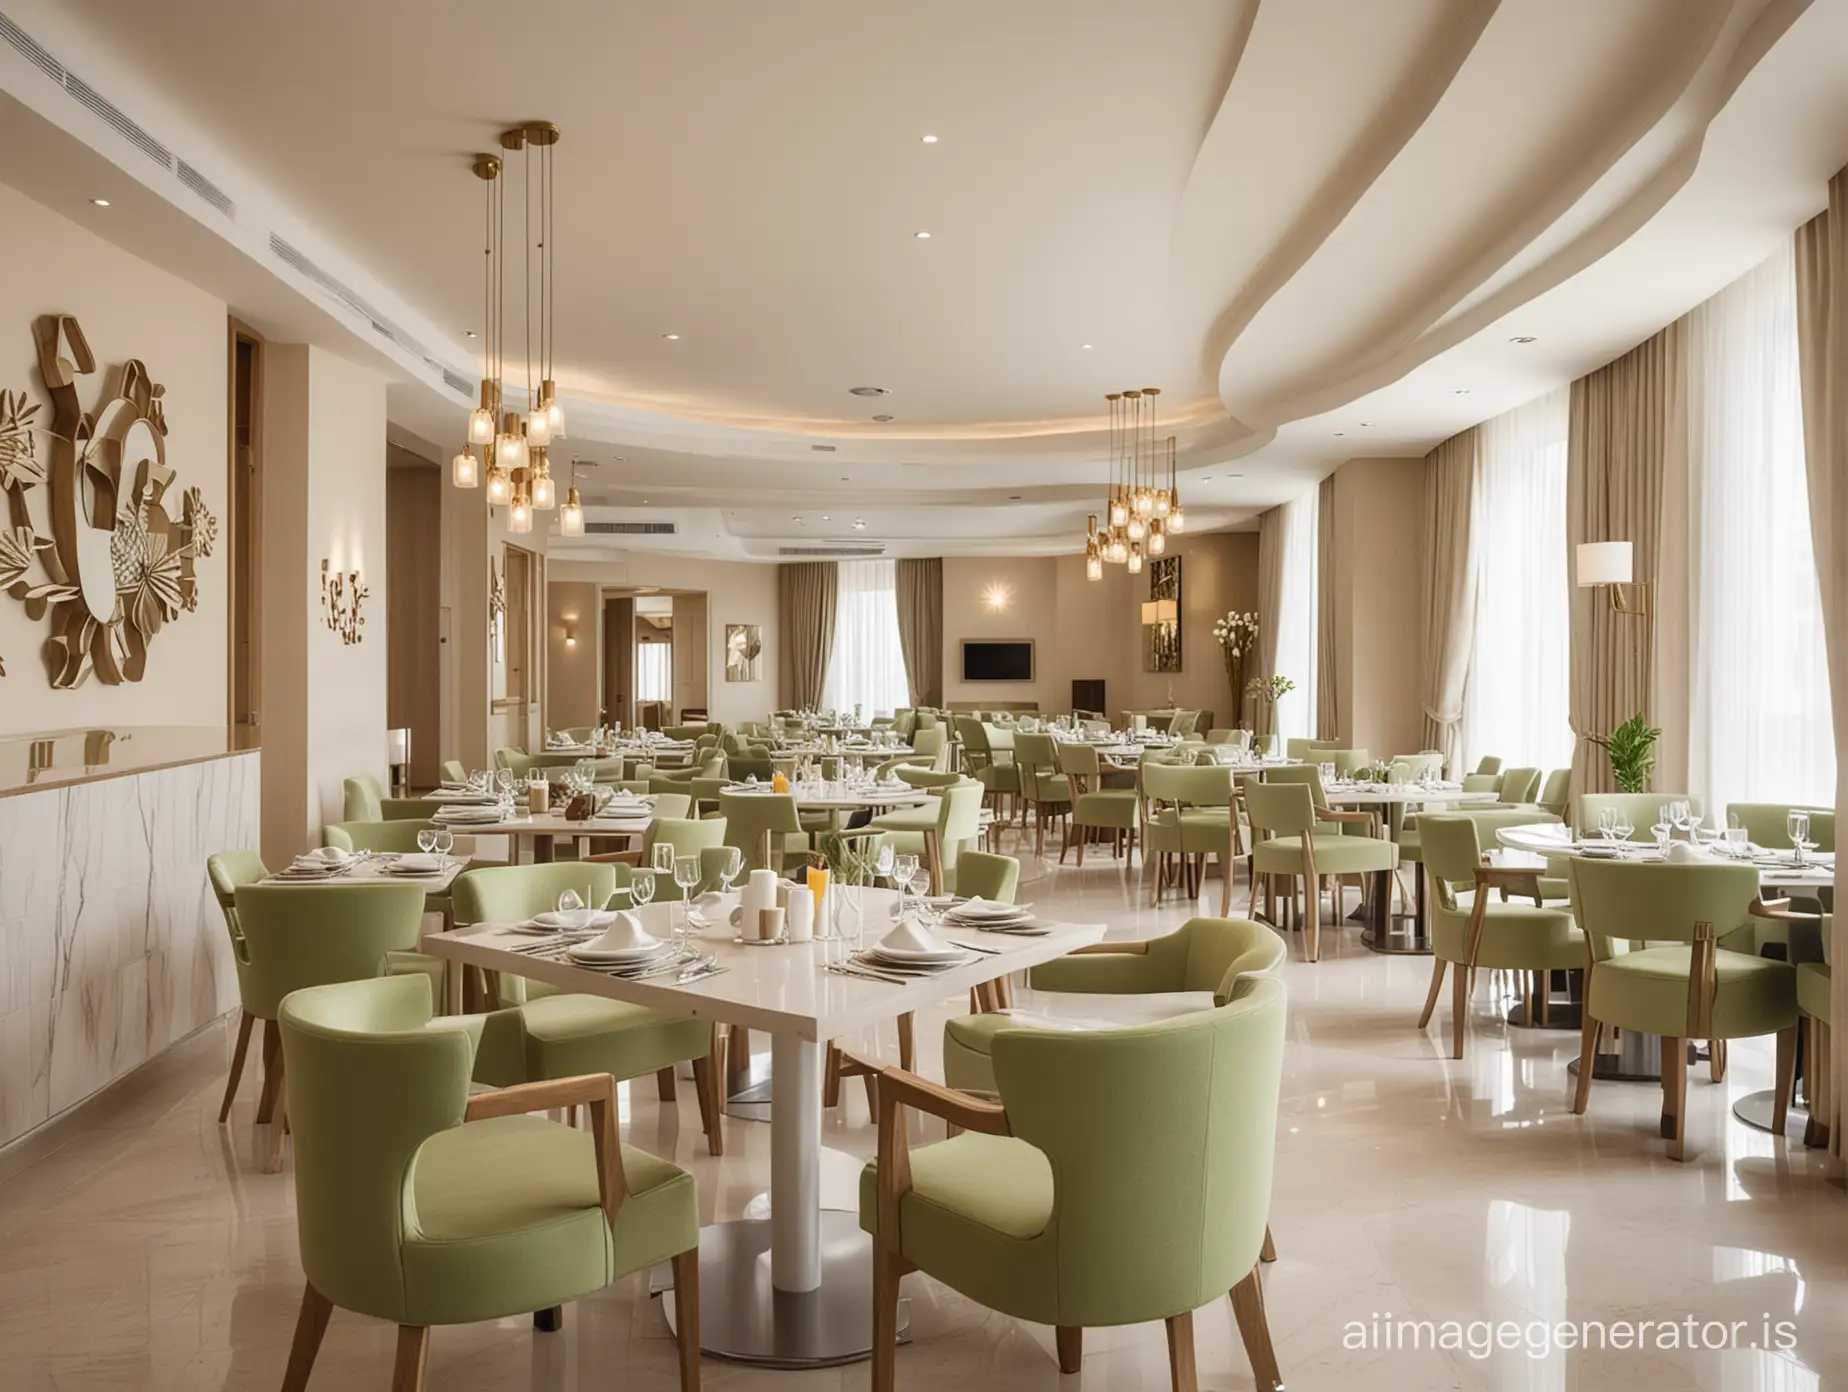 Modern-Bahrain-Hotel-Breakfast-Room-with-White-and-SandTinted-Decor